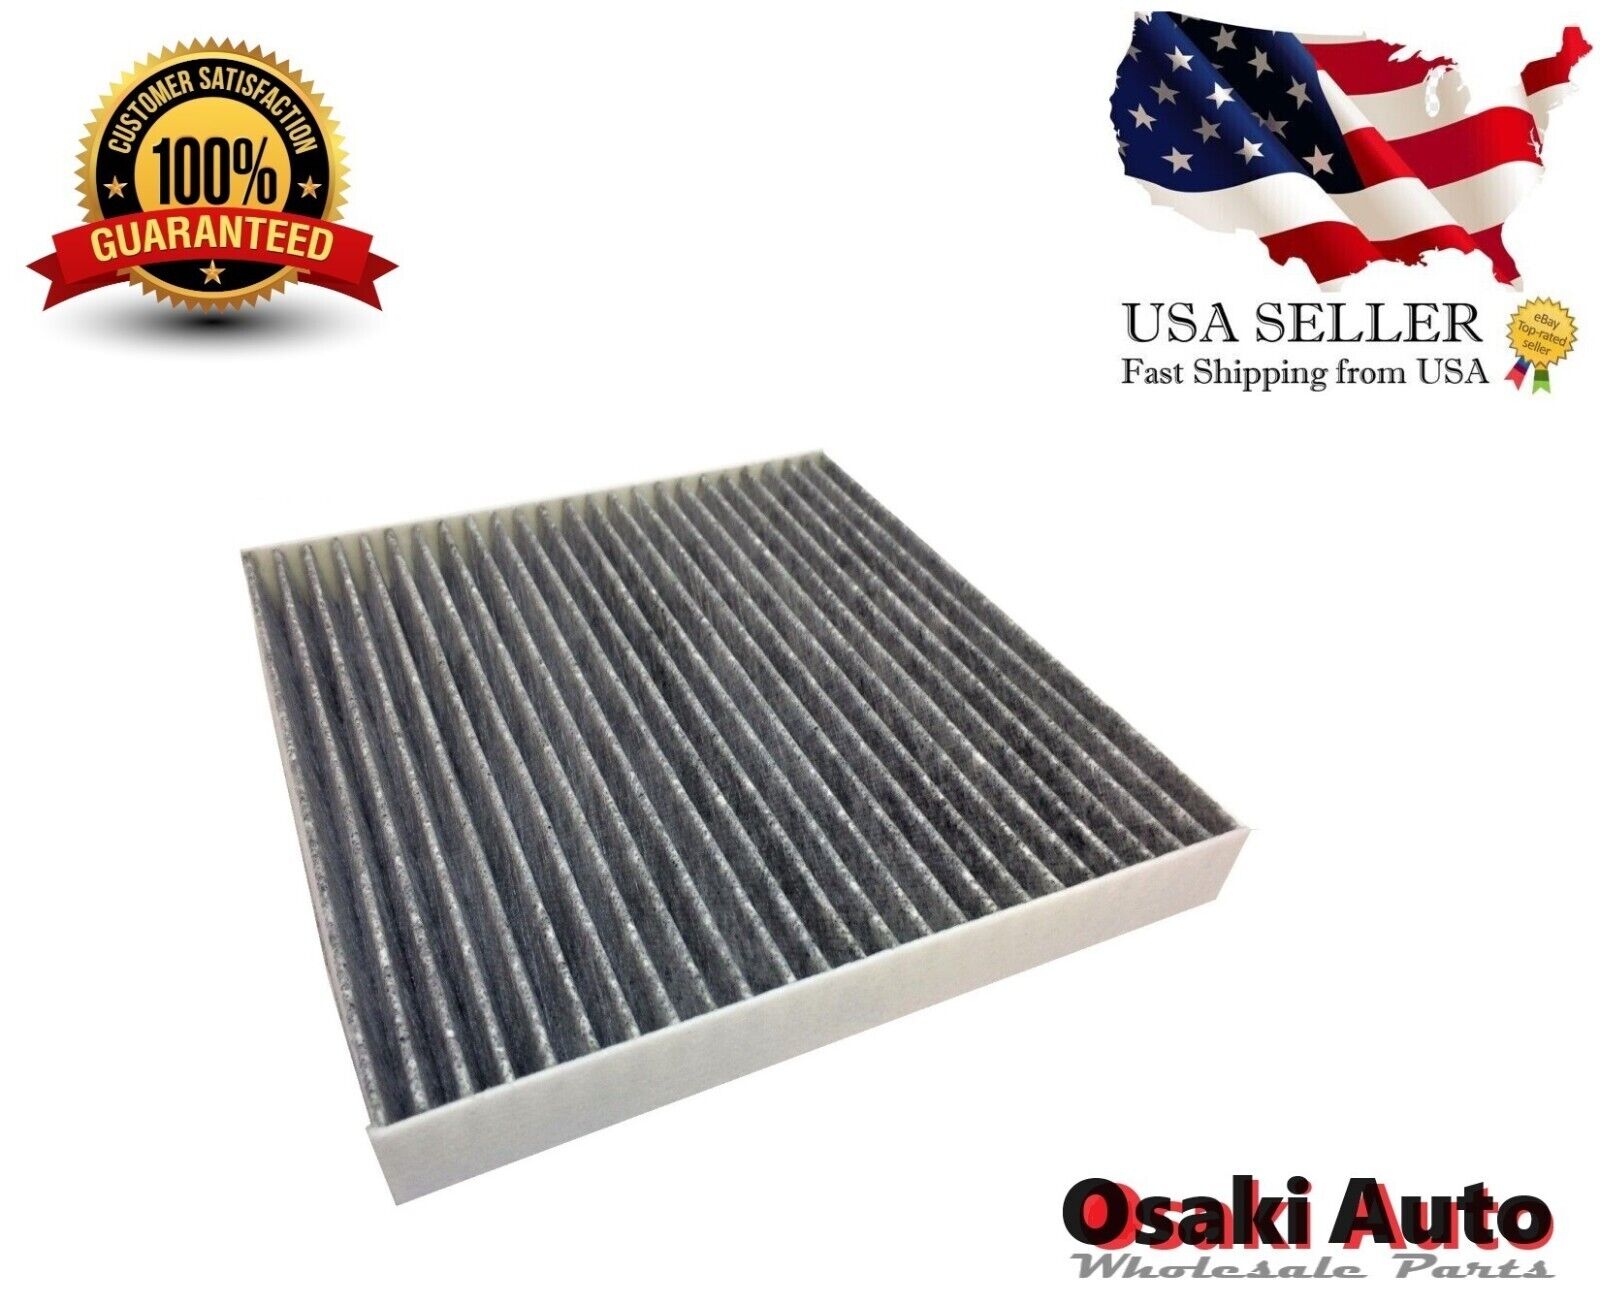 PREMIUM CHARCOAL CABIN AIR FILTER For Honda & Acura Vehicles (see compatibility)